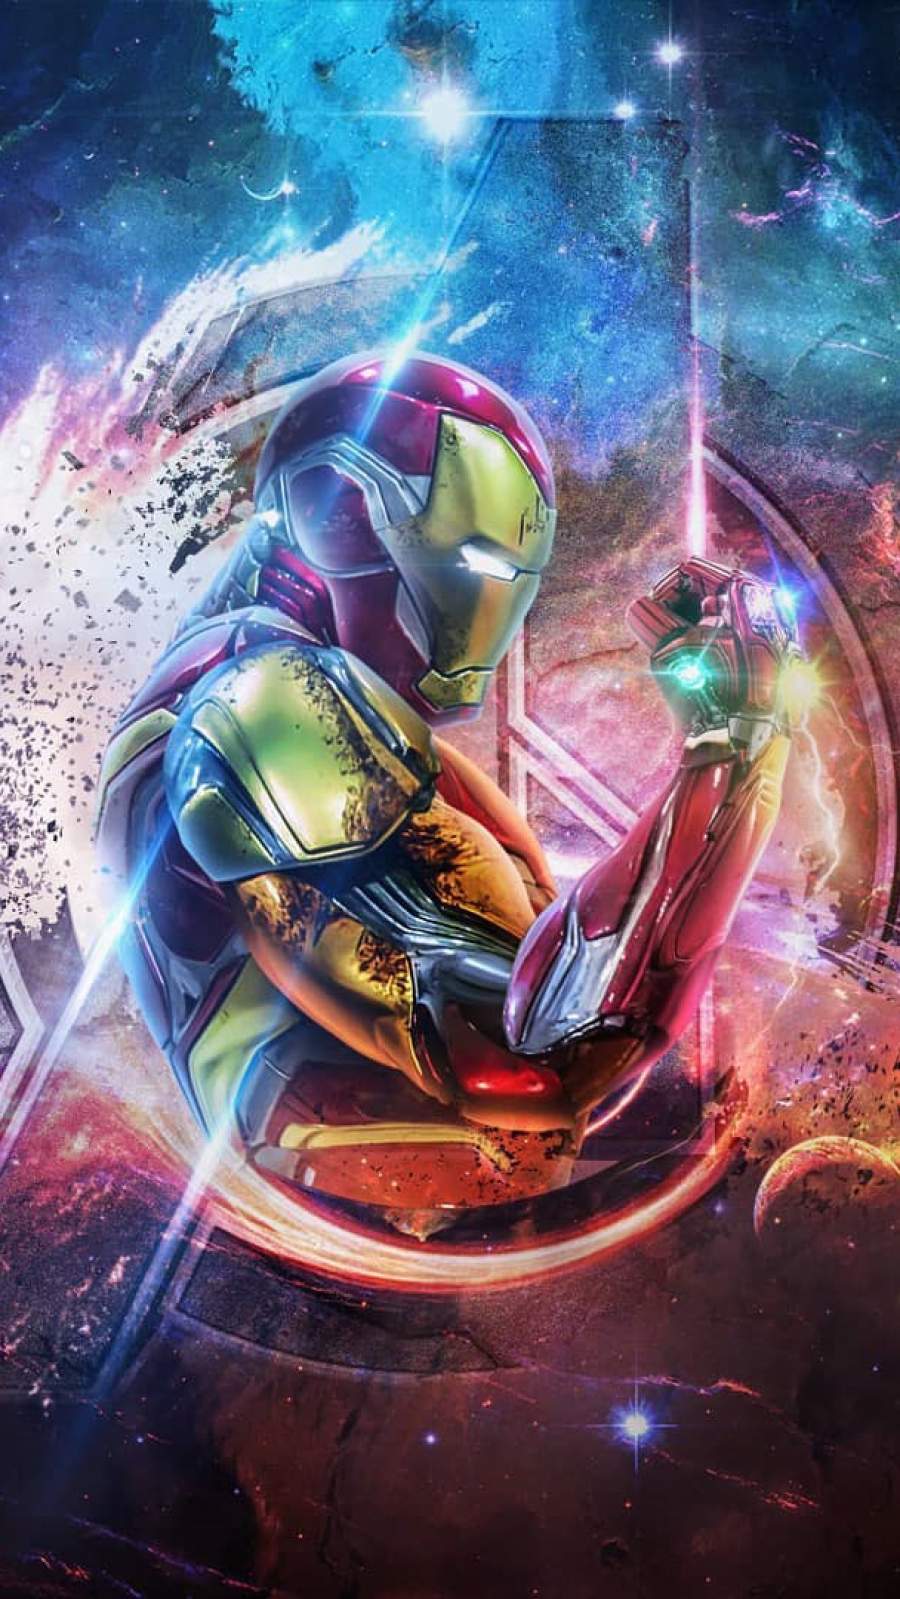 I Am Iron Man IPhone Wallpaper - IPhone Wallpapers : iPhone Wallpapers